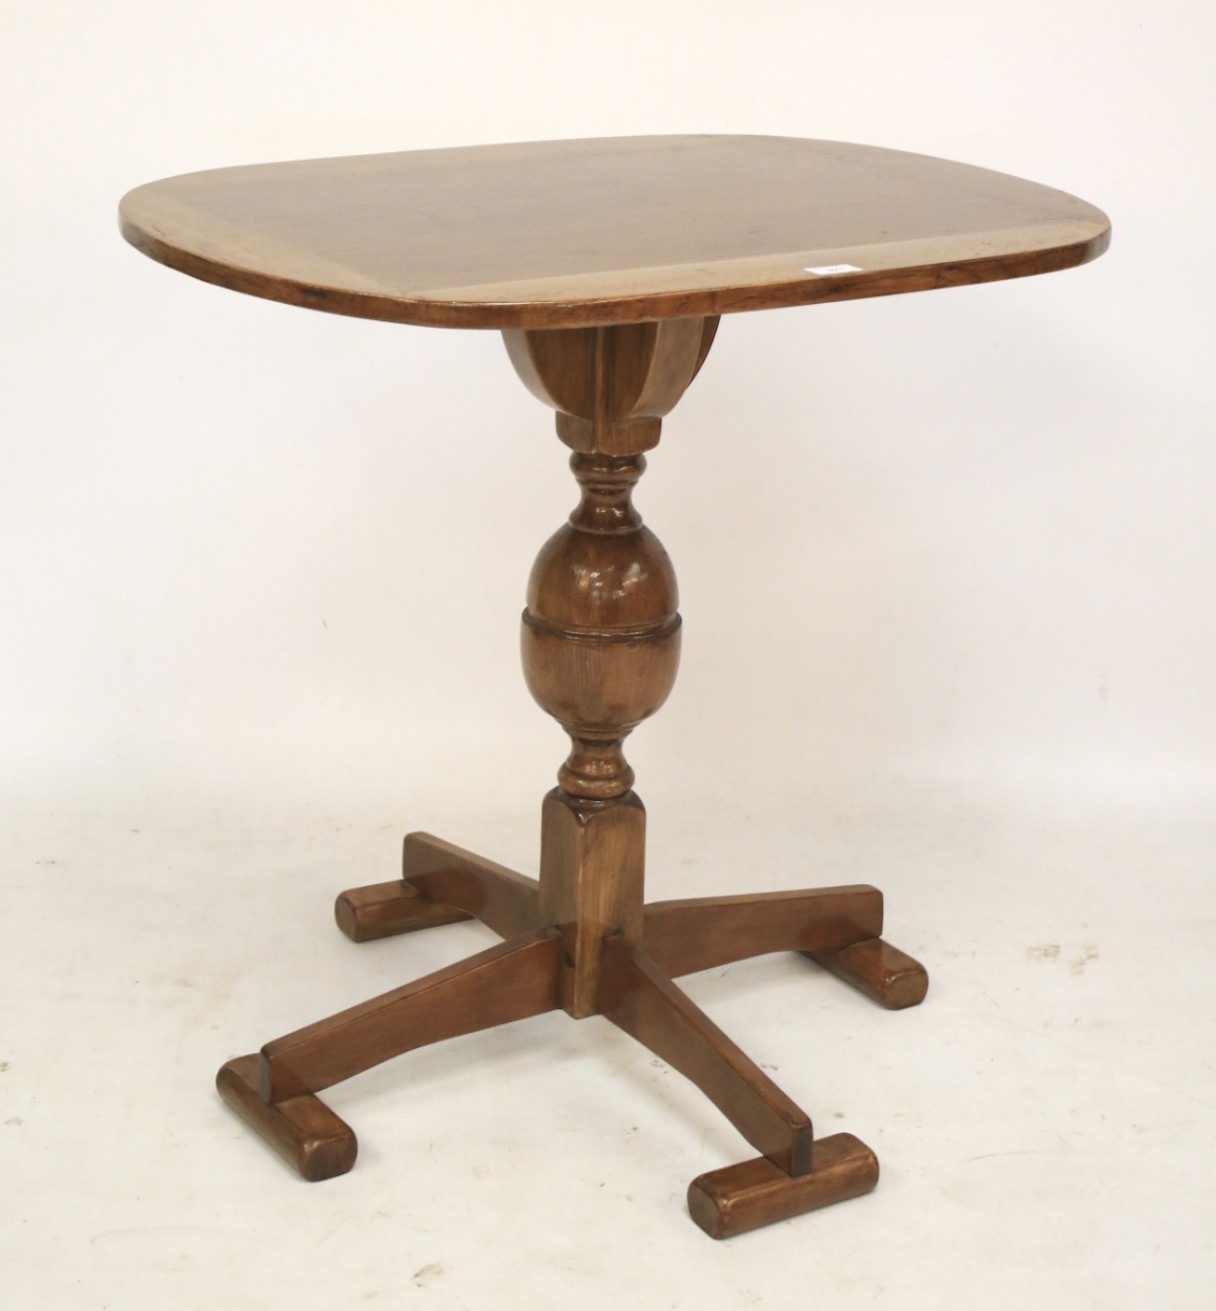 An ecclesiastical oak oval topped table.